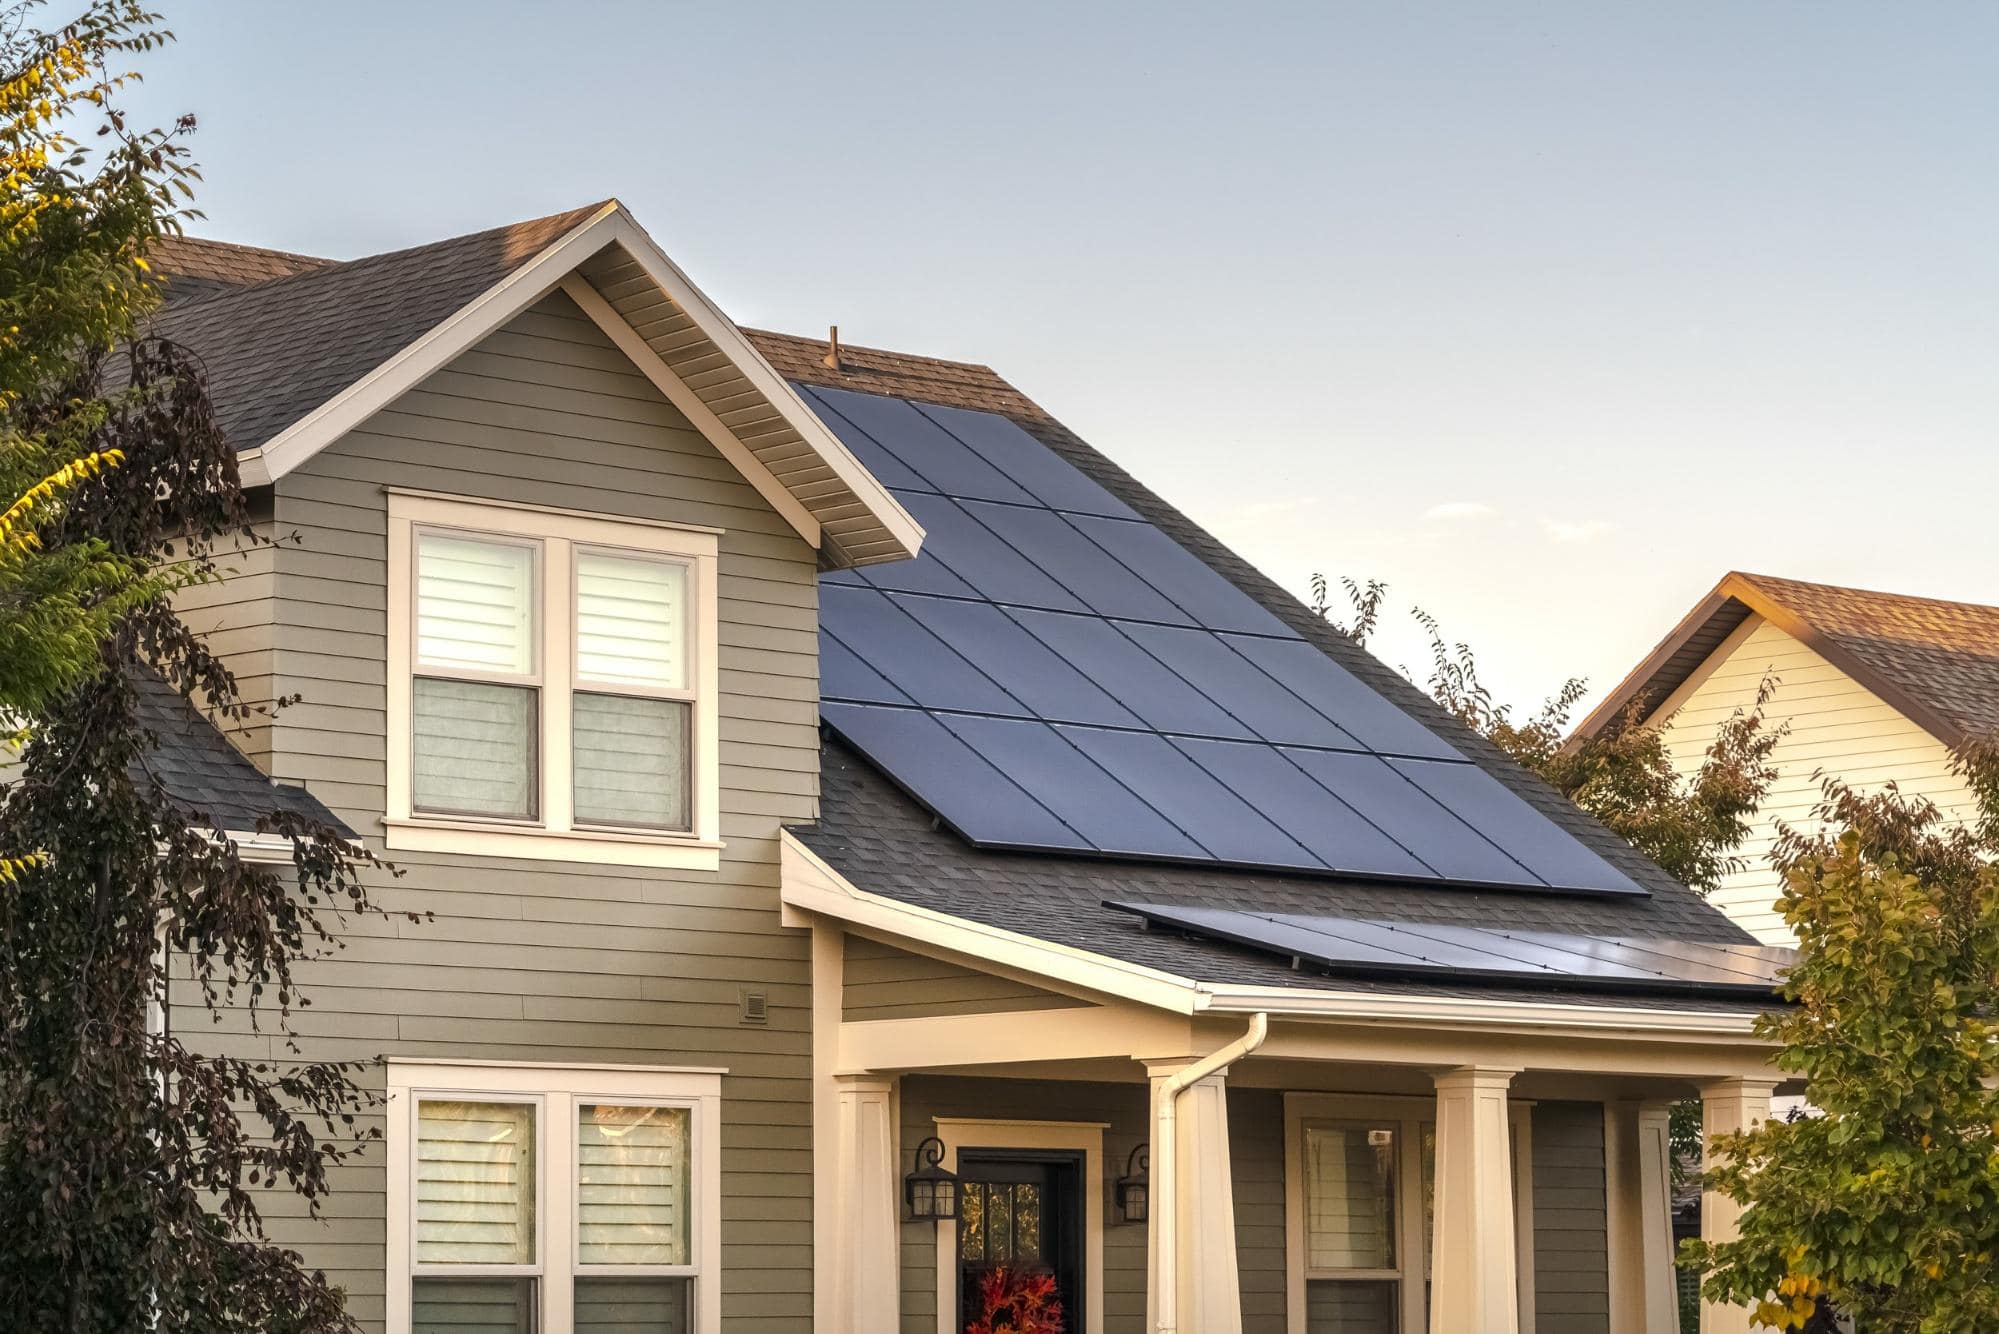 what-you-need-to-know-about-solar-panels-for-your-home-in-2021-a-m